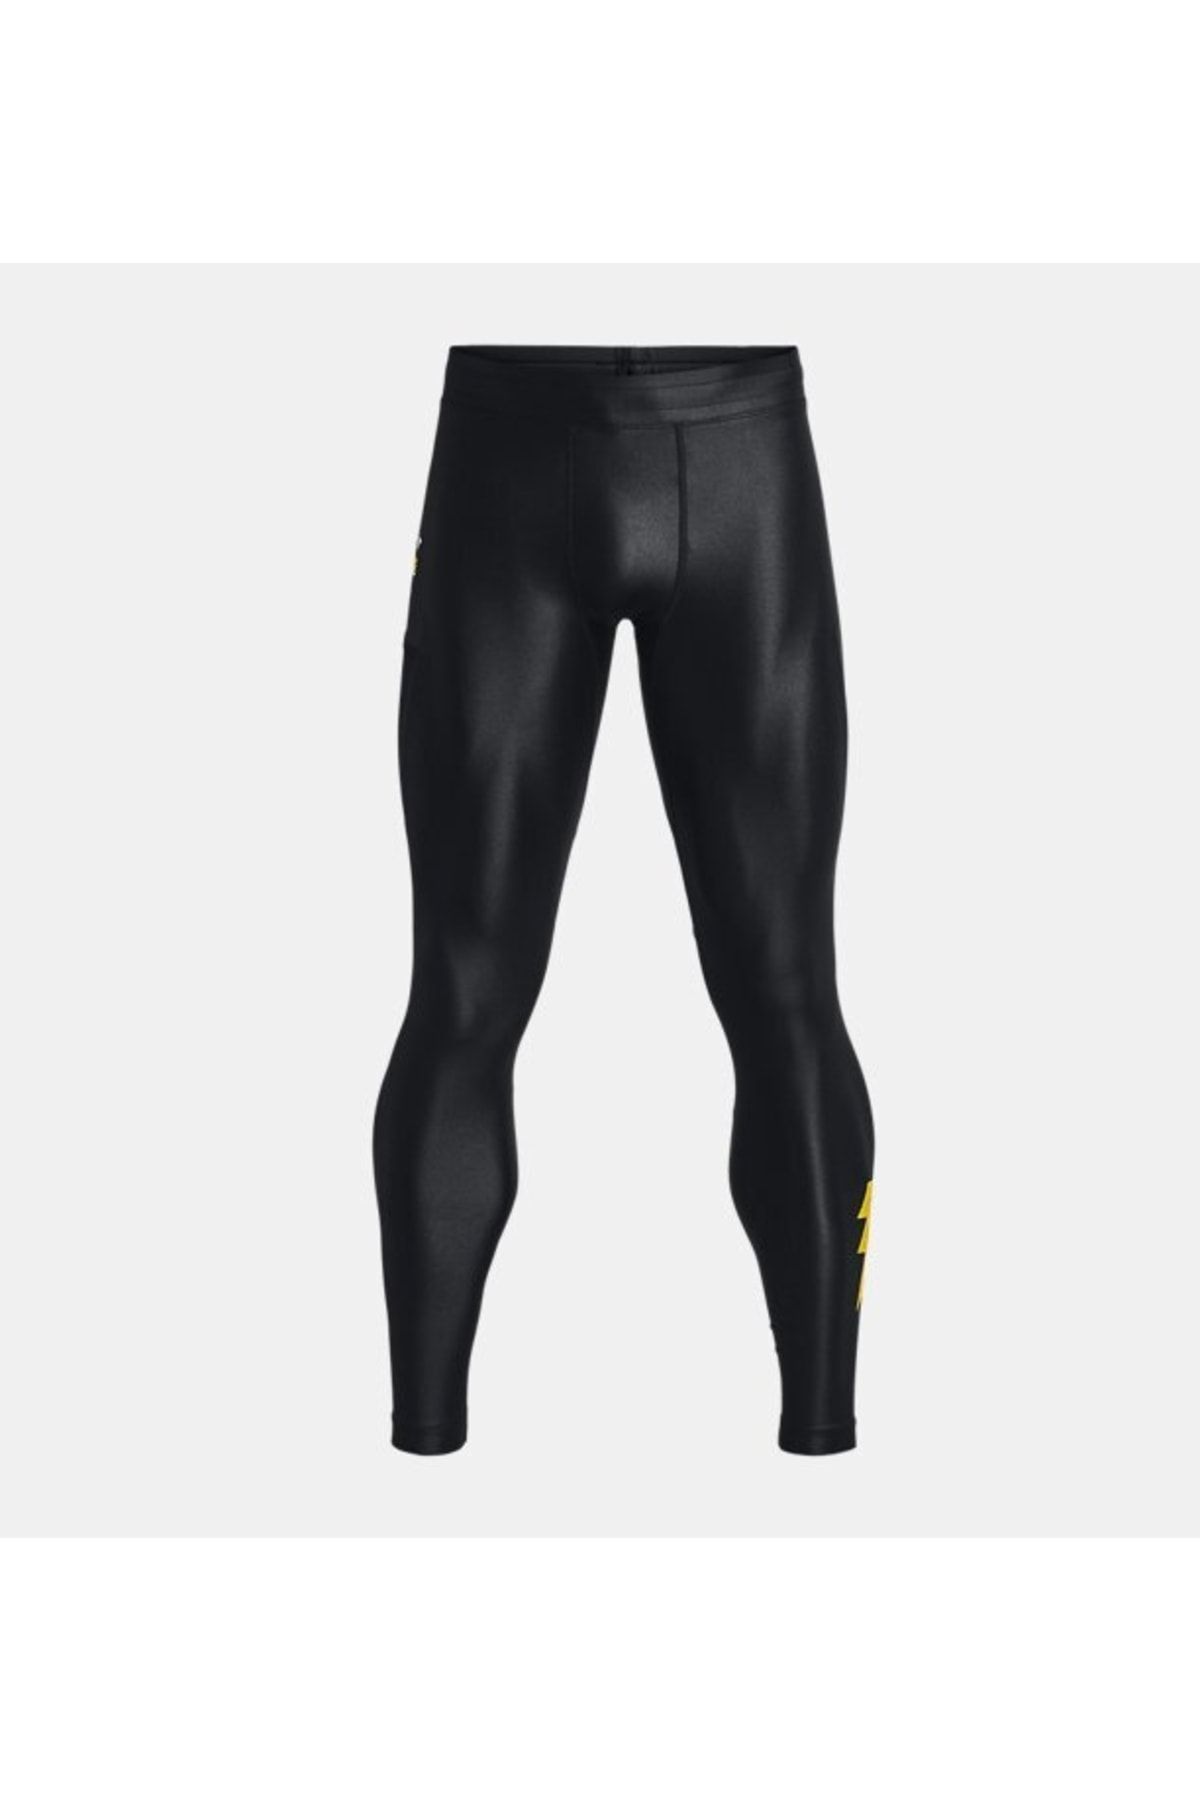 Under Armour Leggings Project Rock Iso-Chill para hombre, color negro